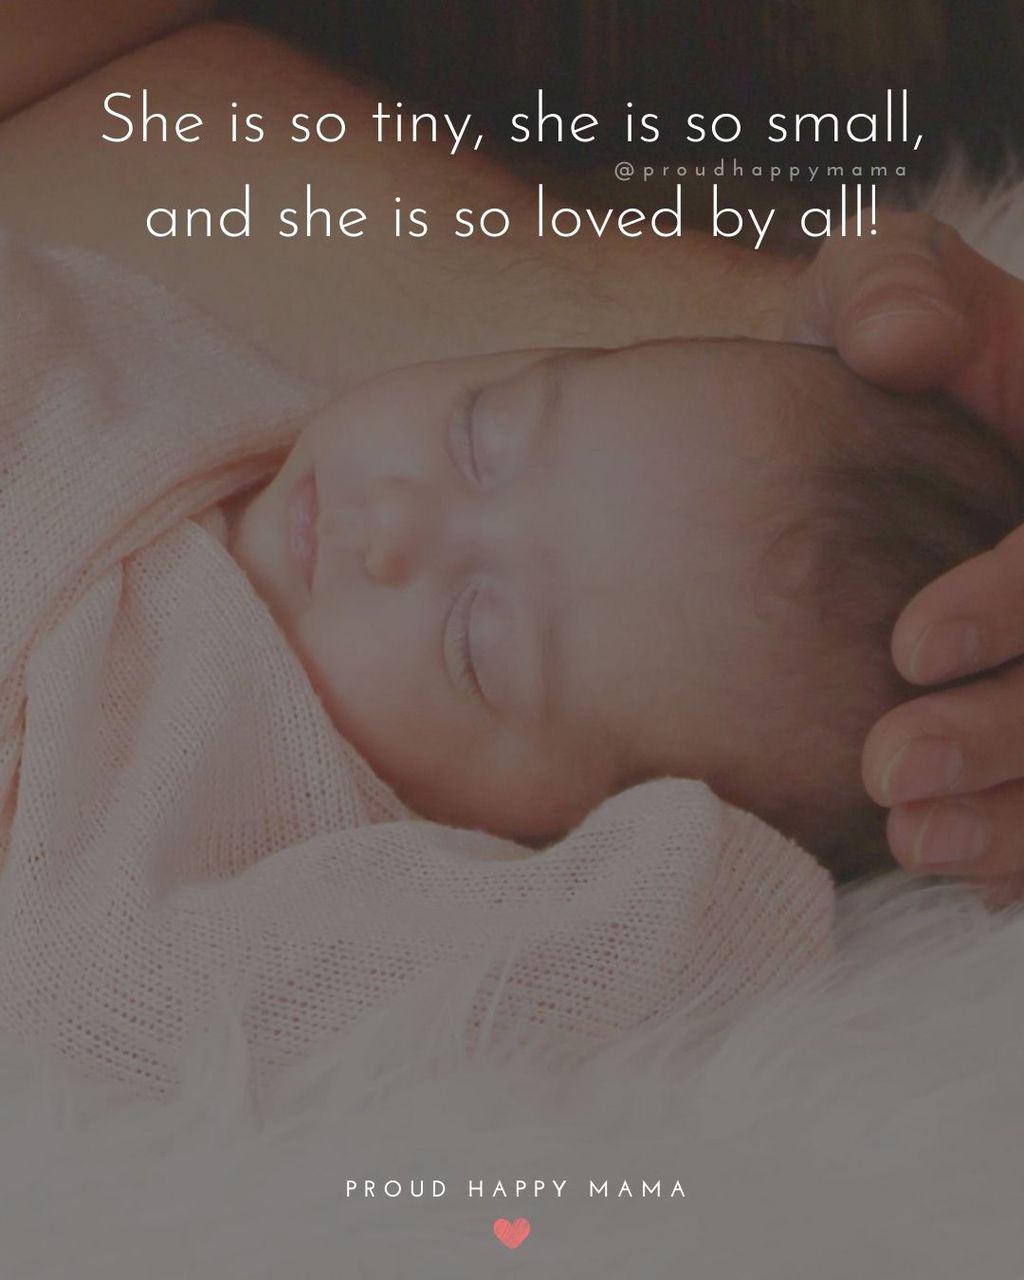 Baby Girl Quotes - She is so tiny, she is so small, and she is so loved by all!